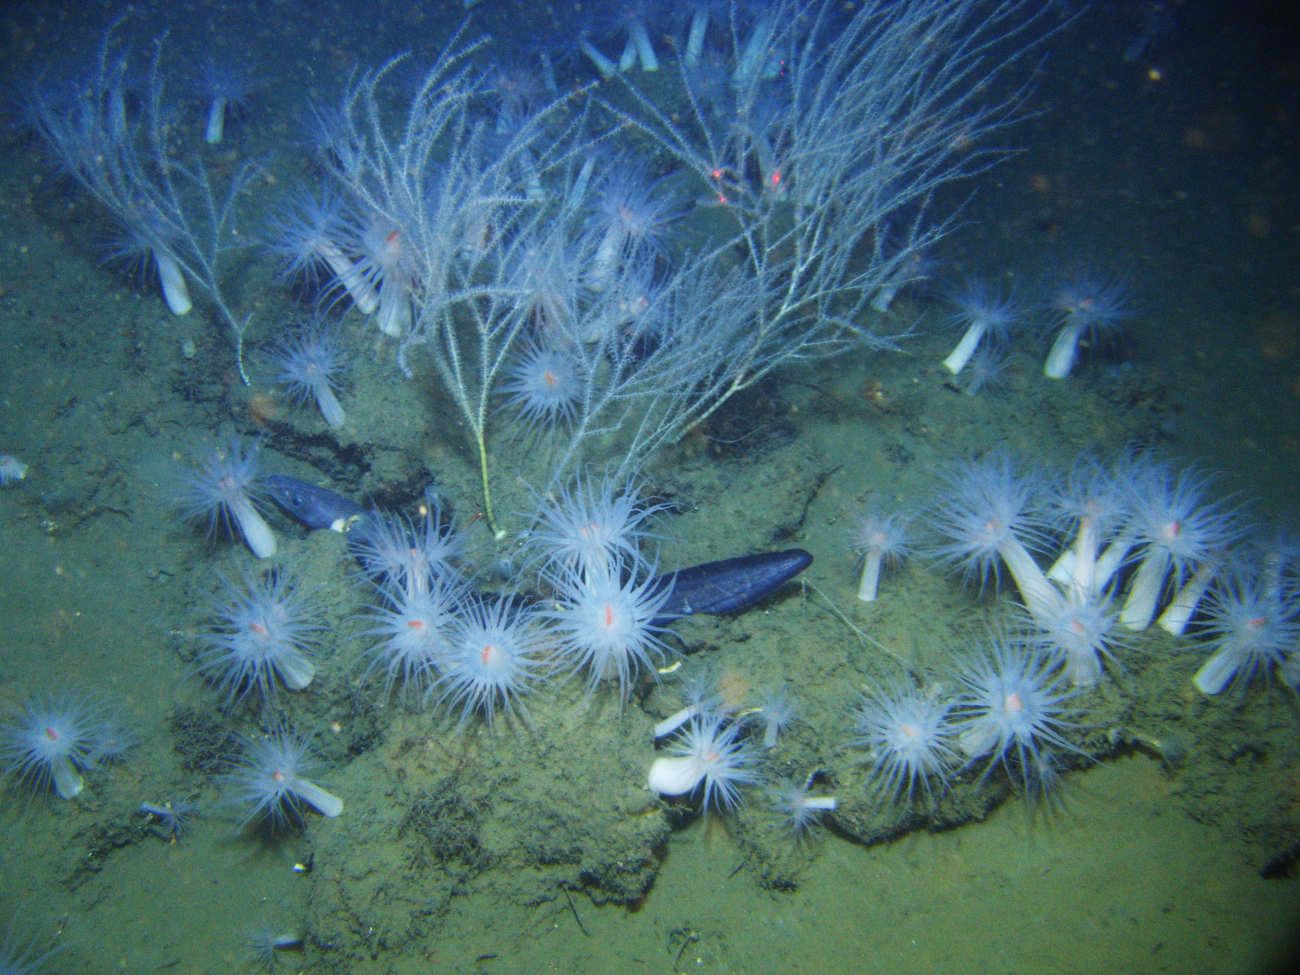 A cusk eel, small bamboo corals, and large white anemones with orange mouths